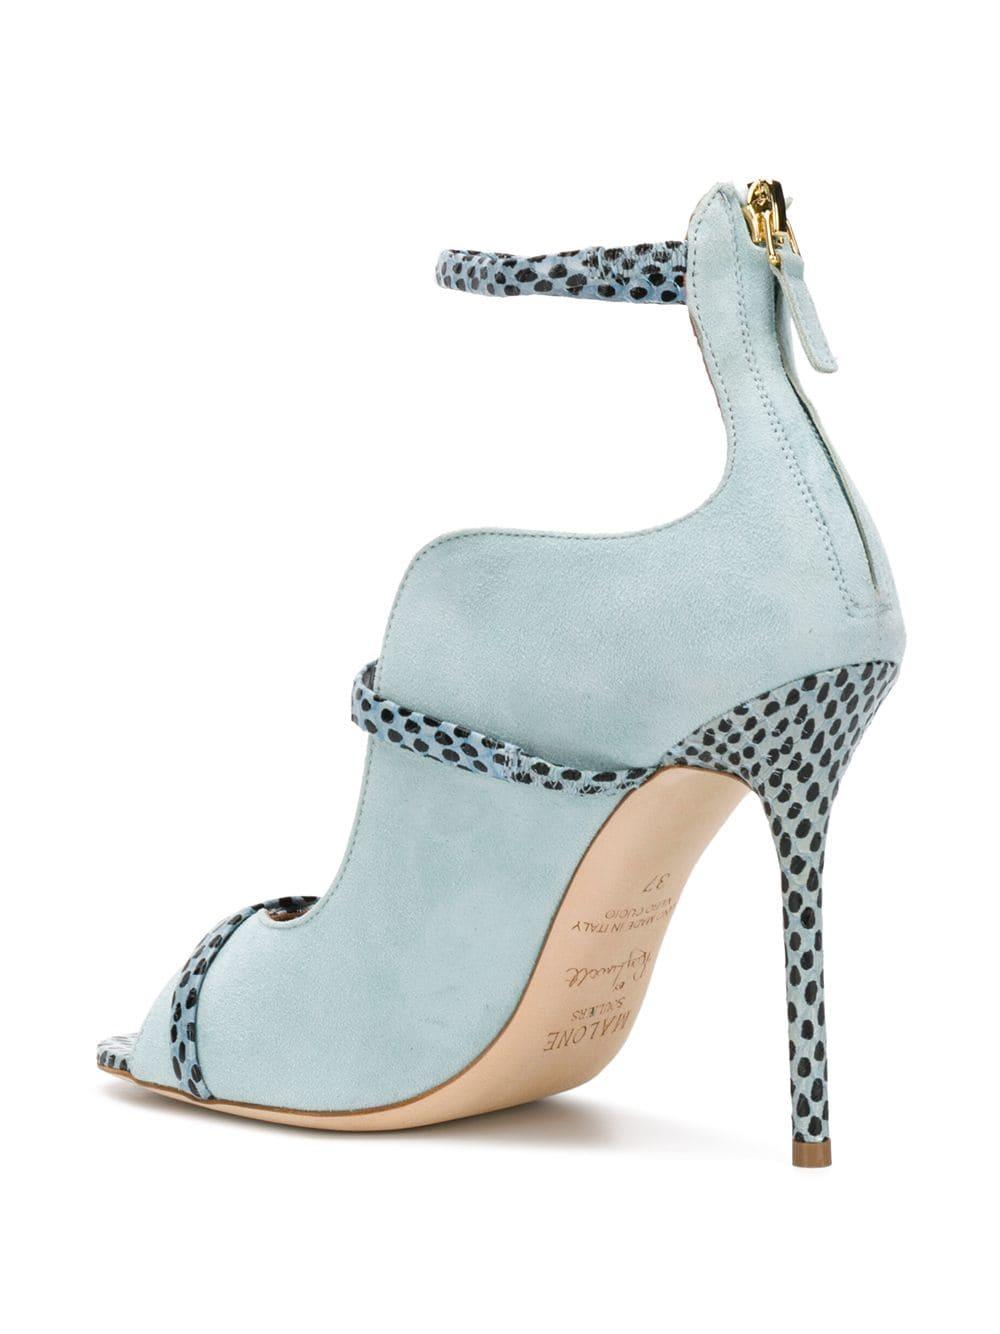 Malone Souliers High Heel Sandals in Blue - Lyst